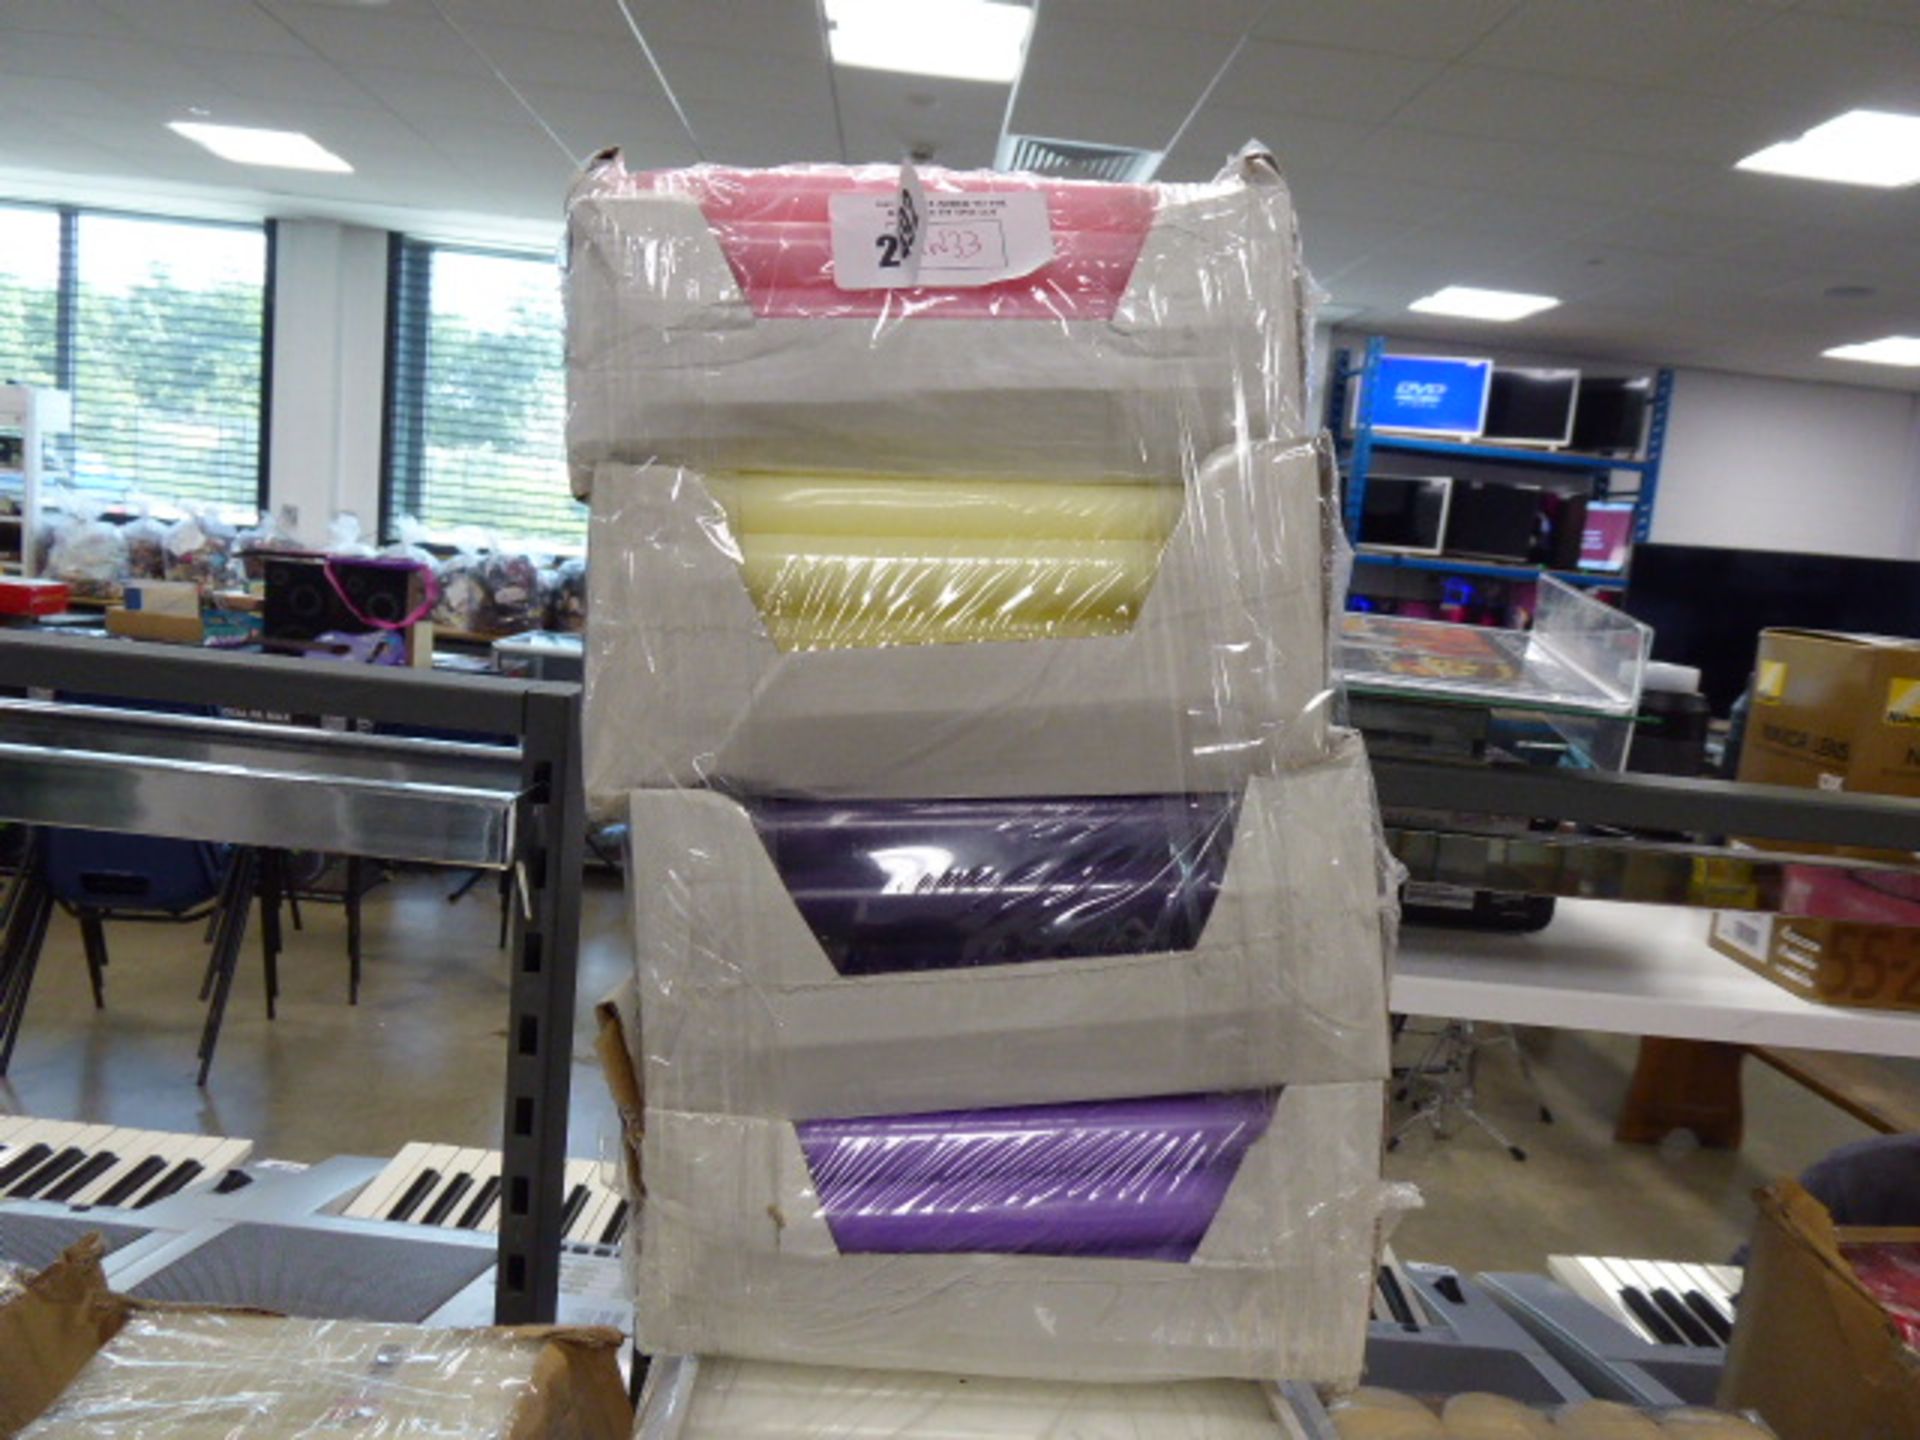 4 boxes of various coloured candles in purple, ivory and pink